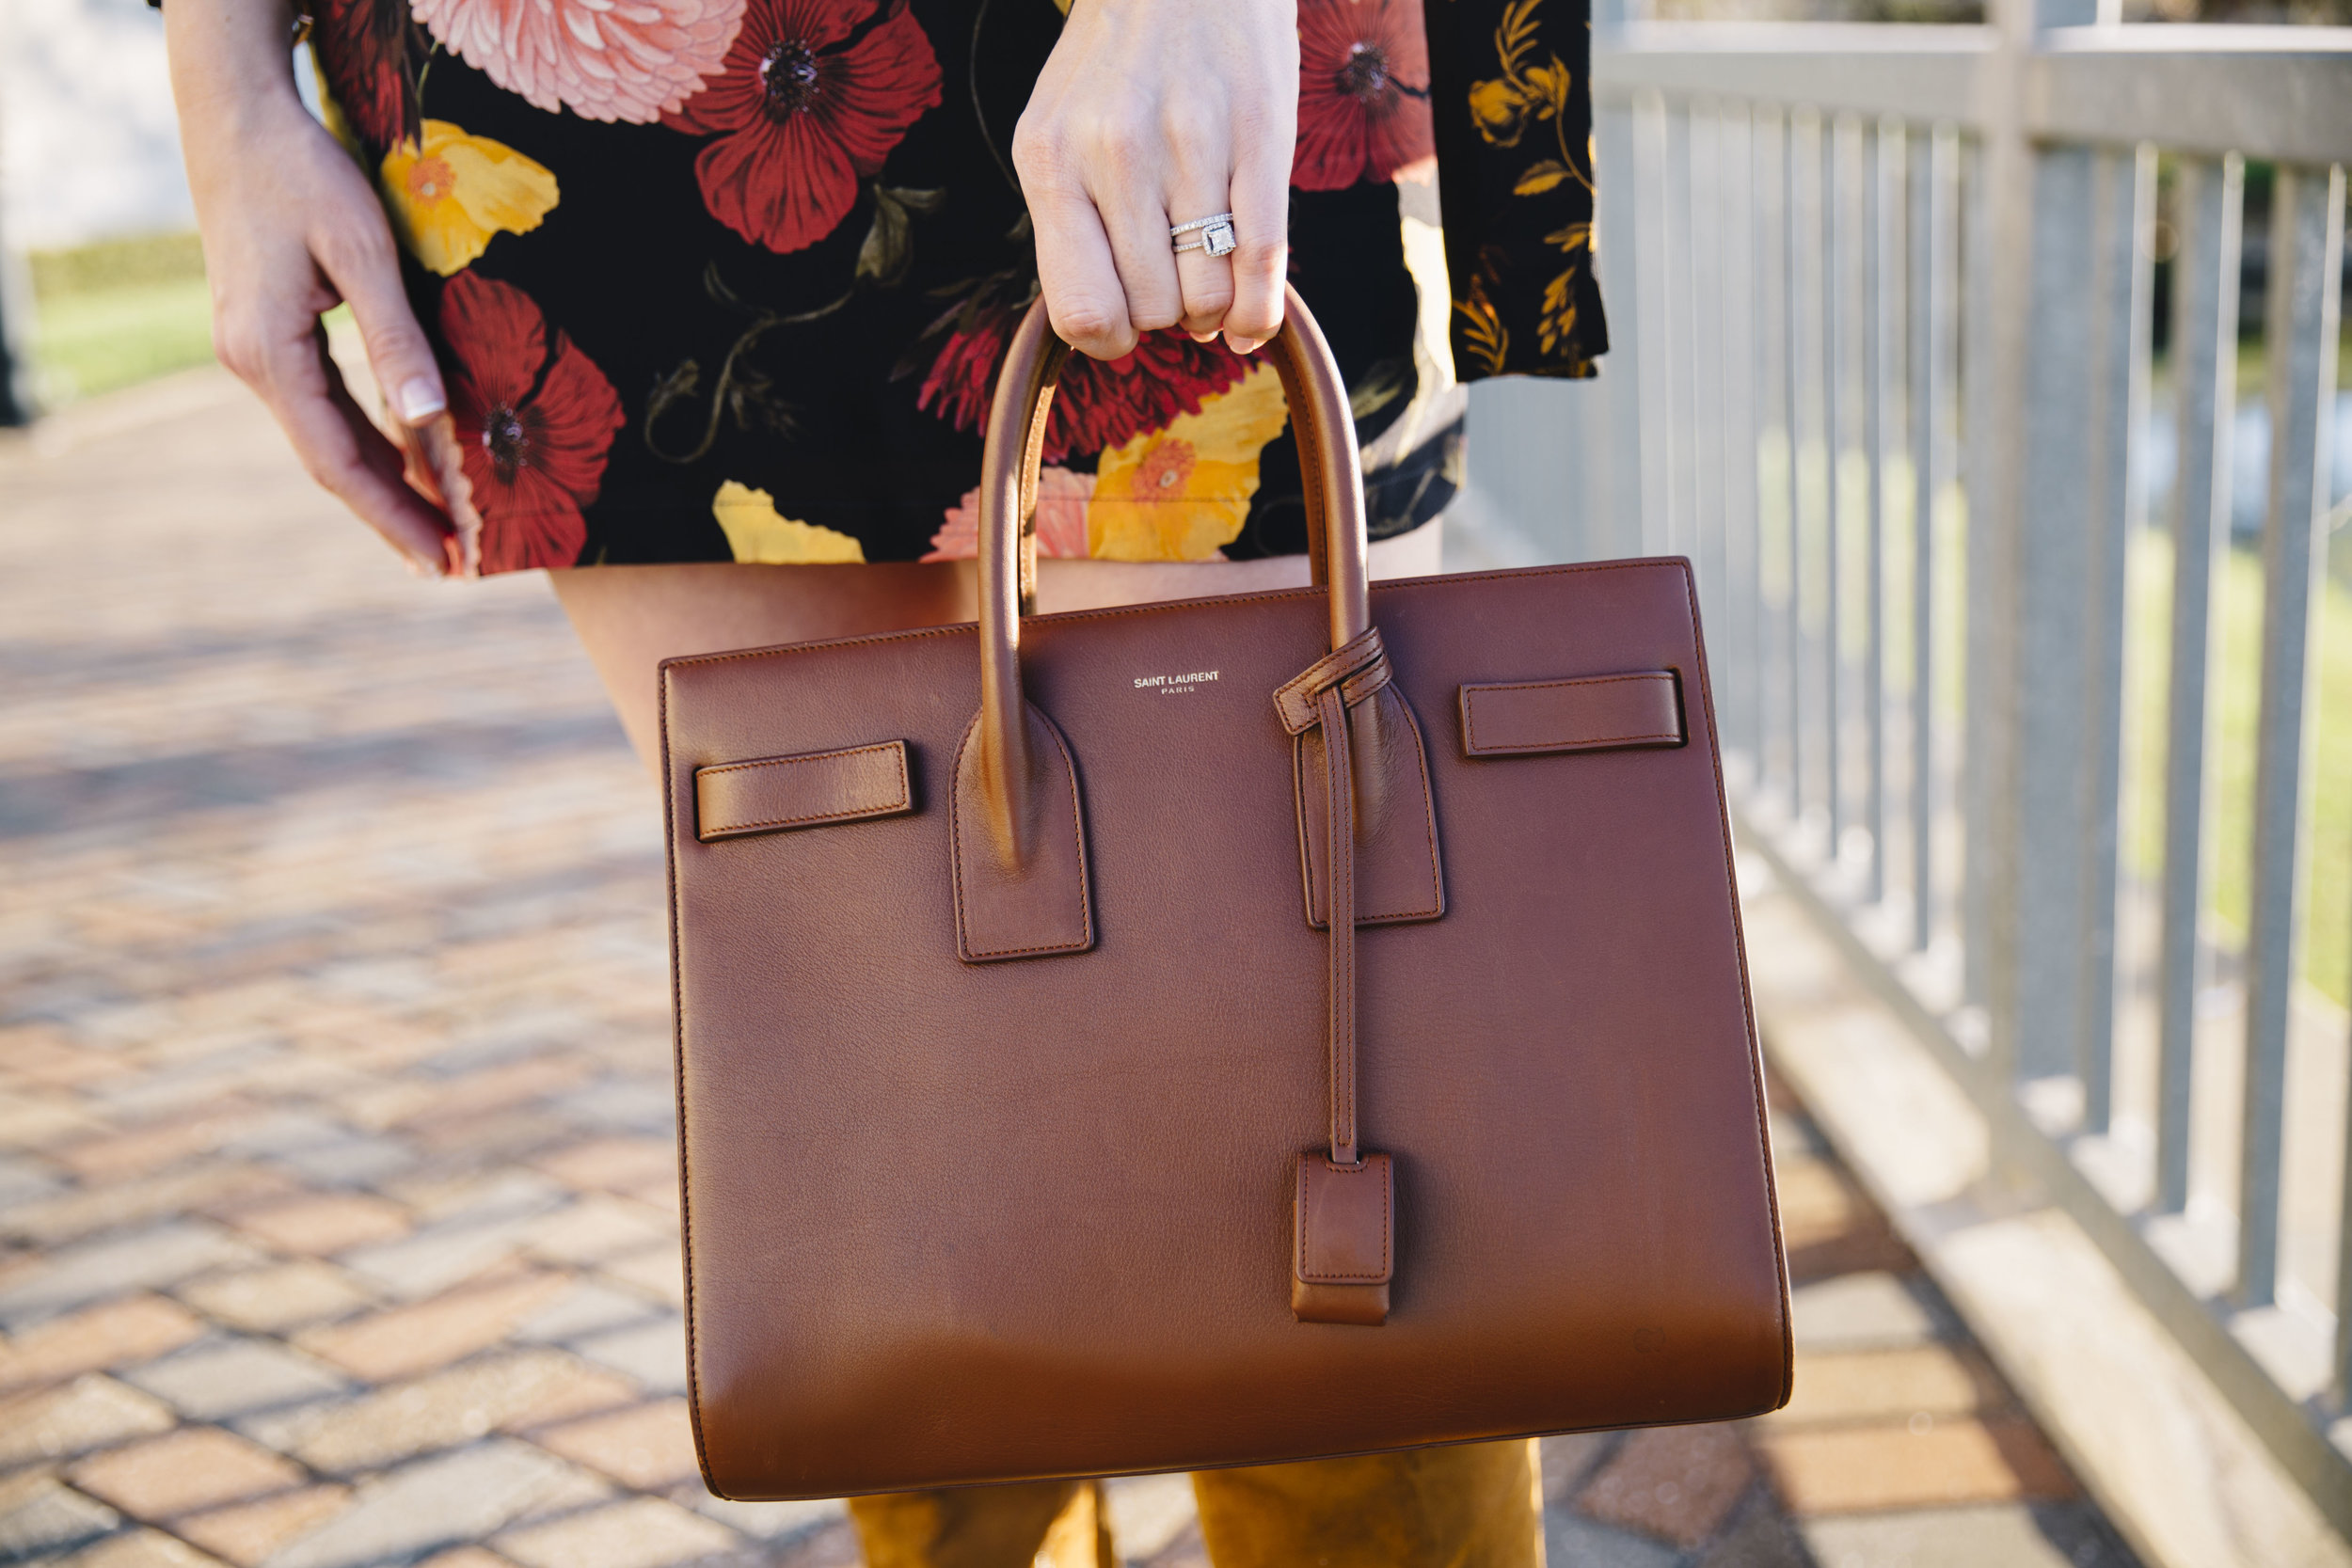 Everything You Need To Know About The Designer Bags I'm Borrowing